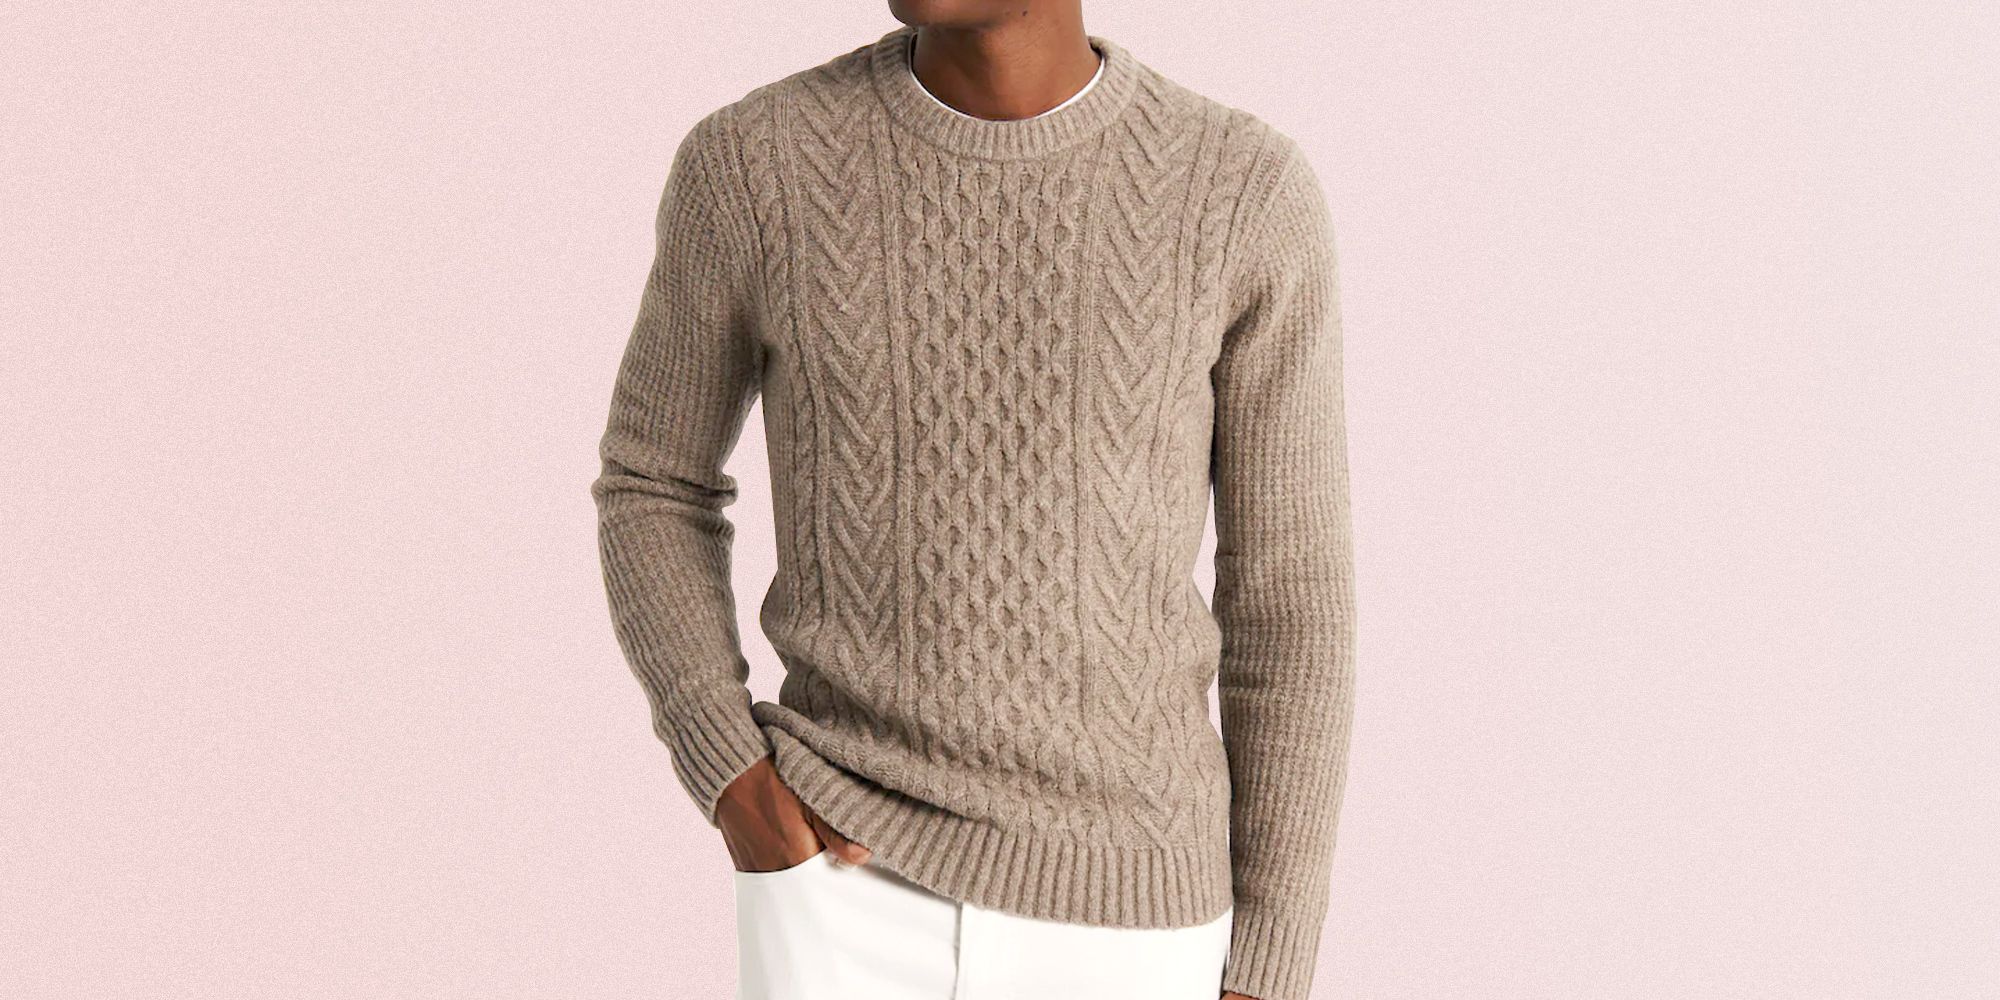 WAYA Mens Long Sleeve Round Neck Casual Knitted Pullover Jumper Sweater 